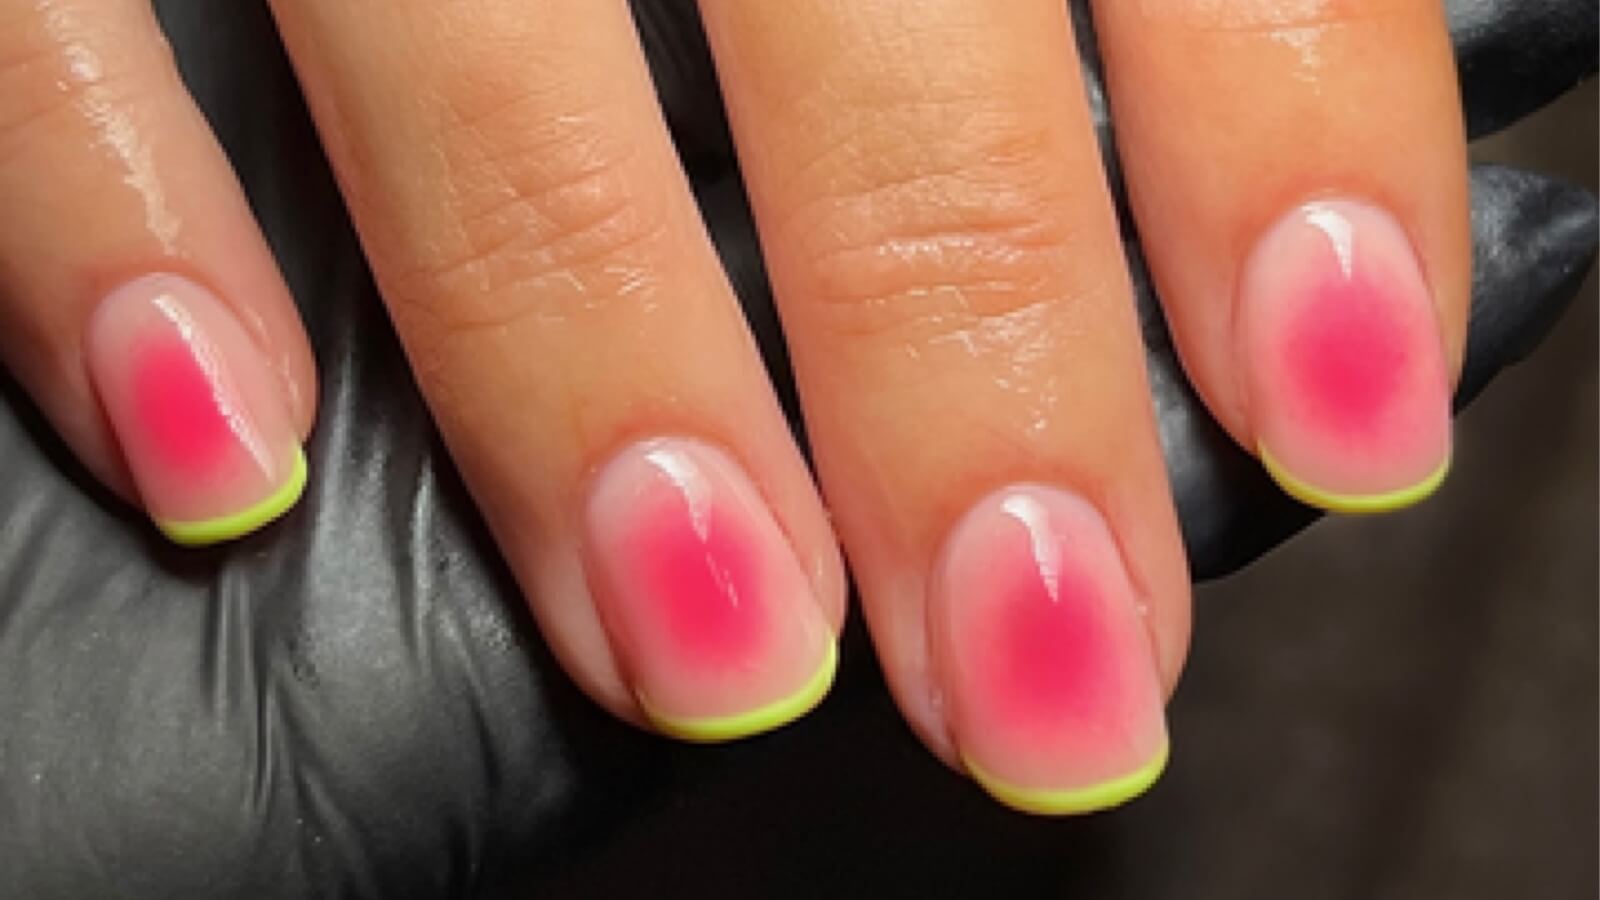 5. Watermelon Nail Art Tutorial for Short Nails - wide 3